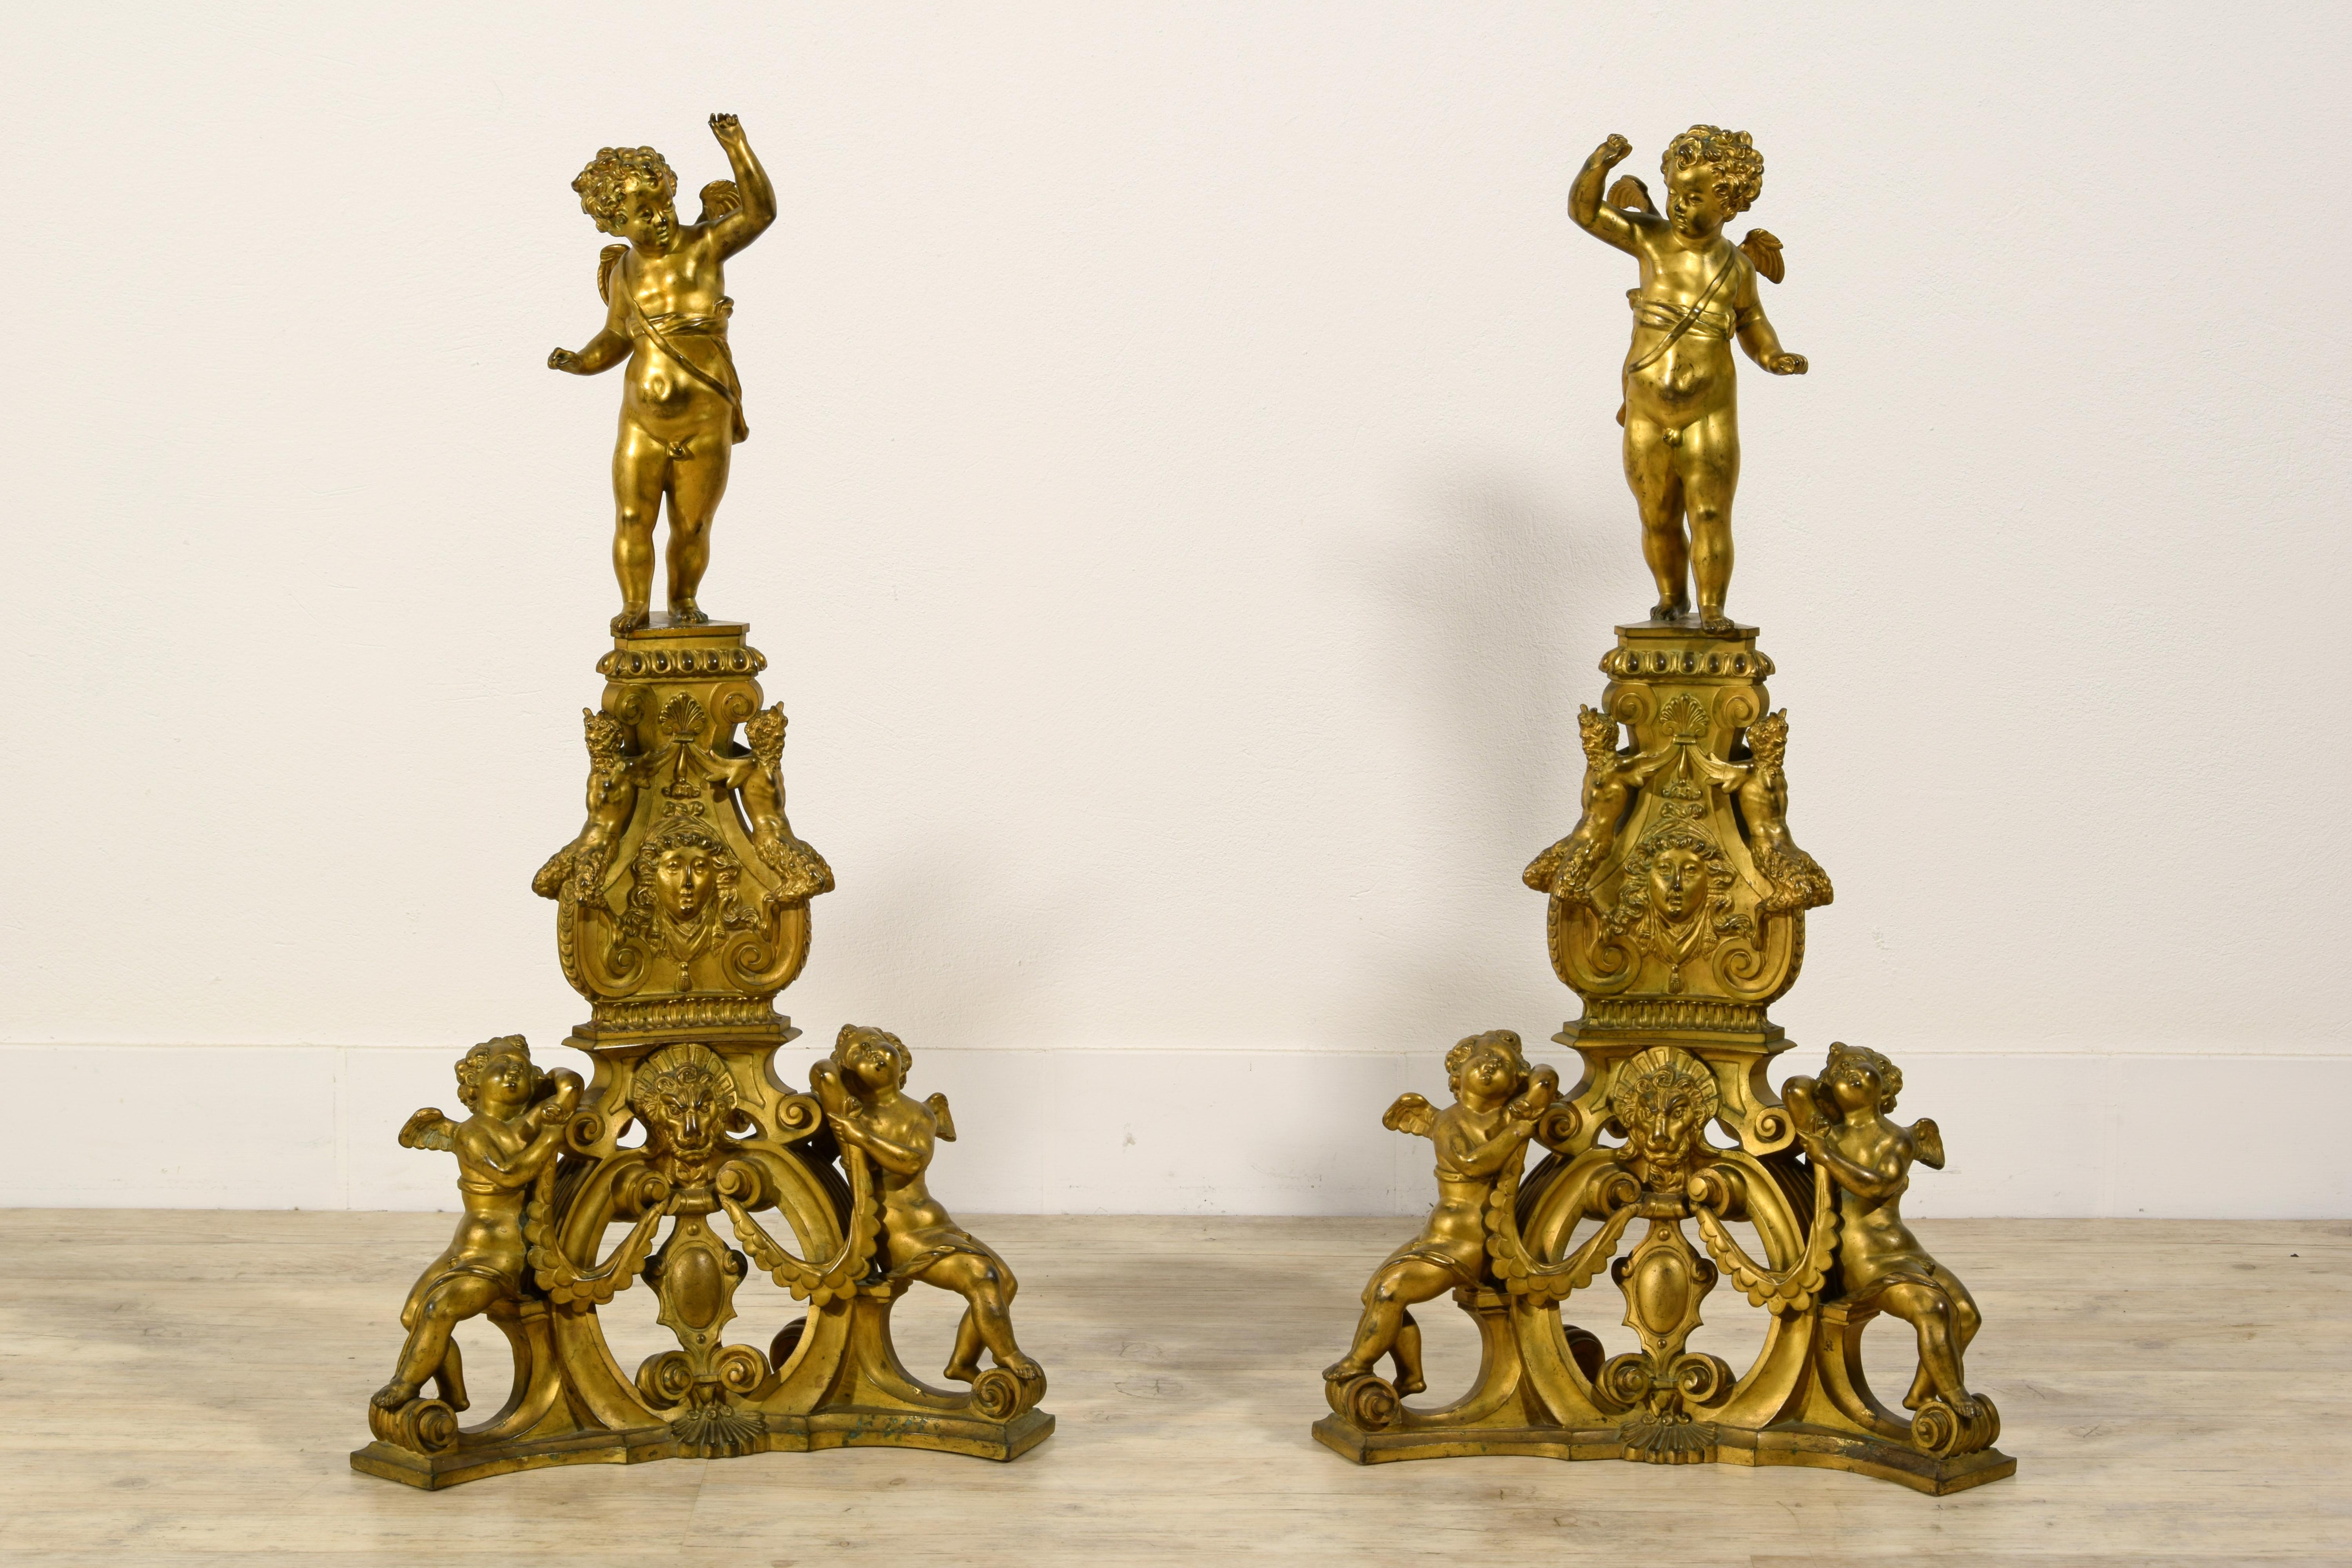 XIX Century, Pair of Venetian gilt bronze fireplace Chenets in Baroque Style

This imposing pair of Fireplace Chenets in finely chiselled and gilded bronze was made in Italy in Venice in the first half of the nineteenth century in Baroque style